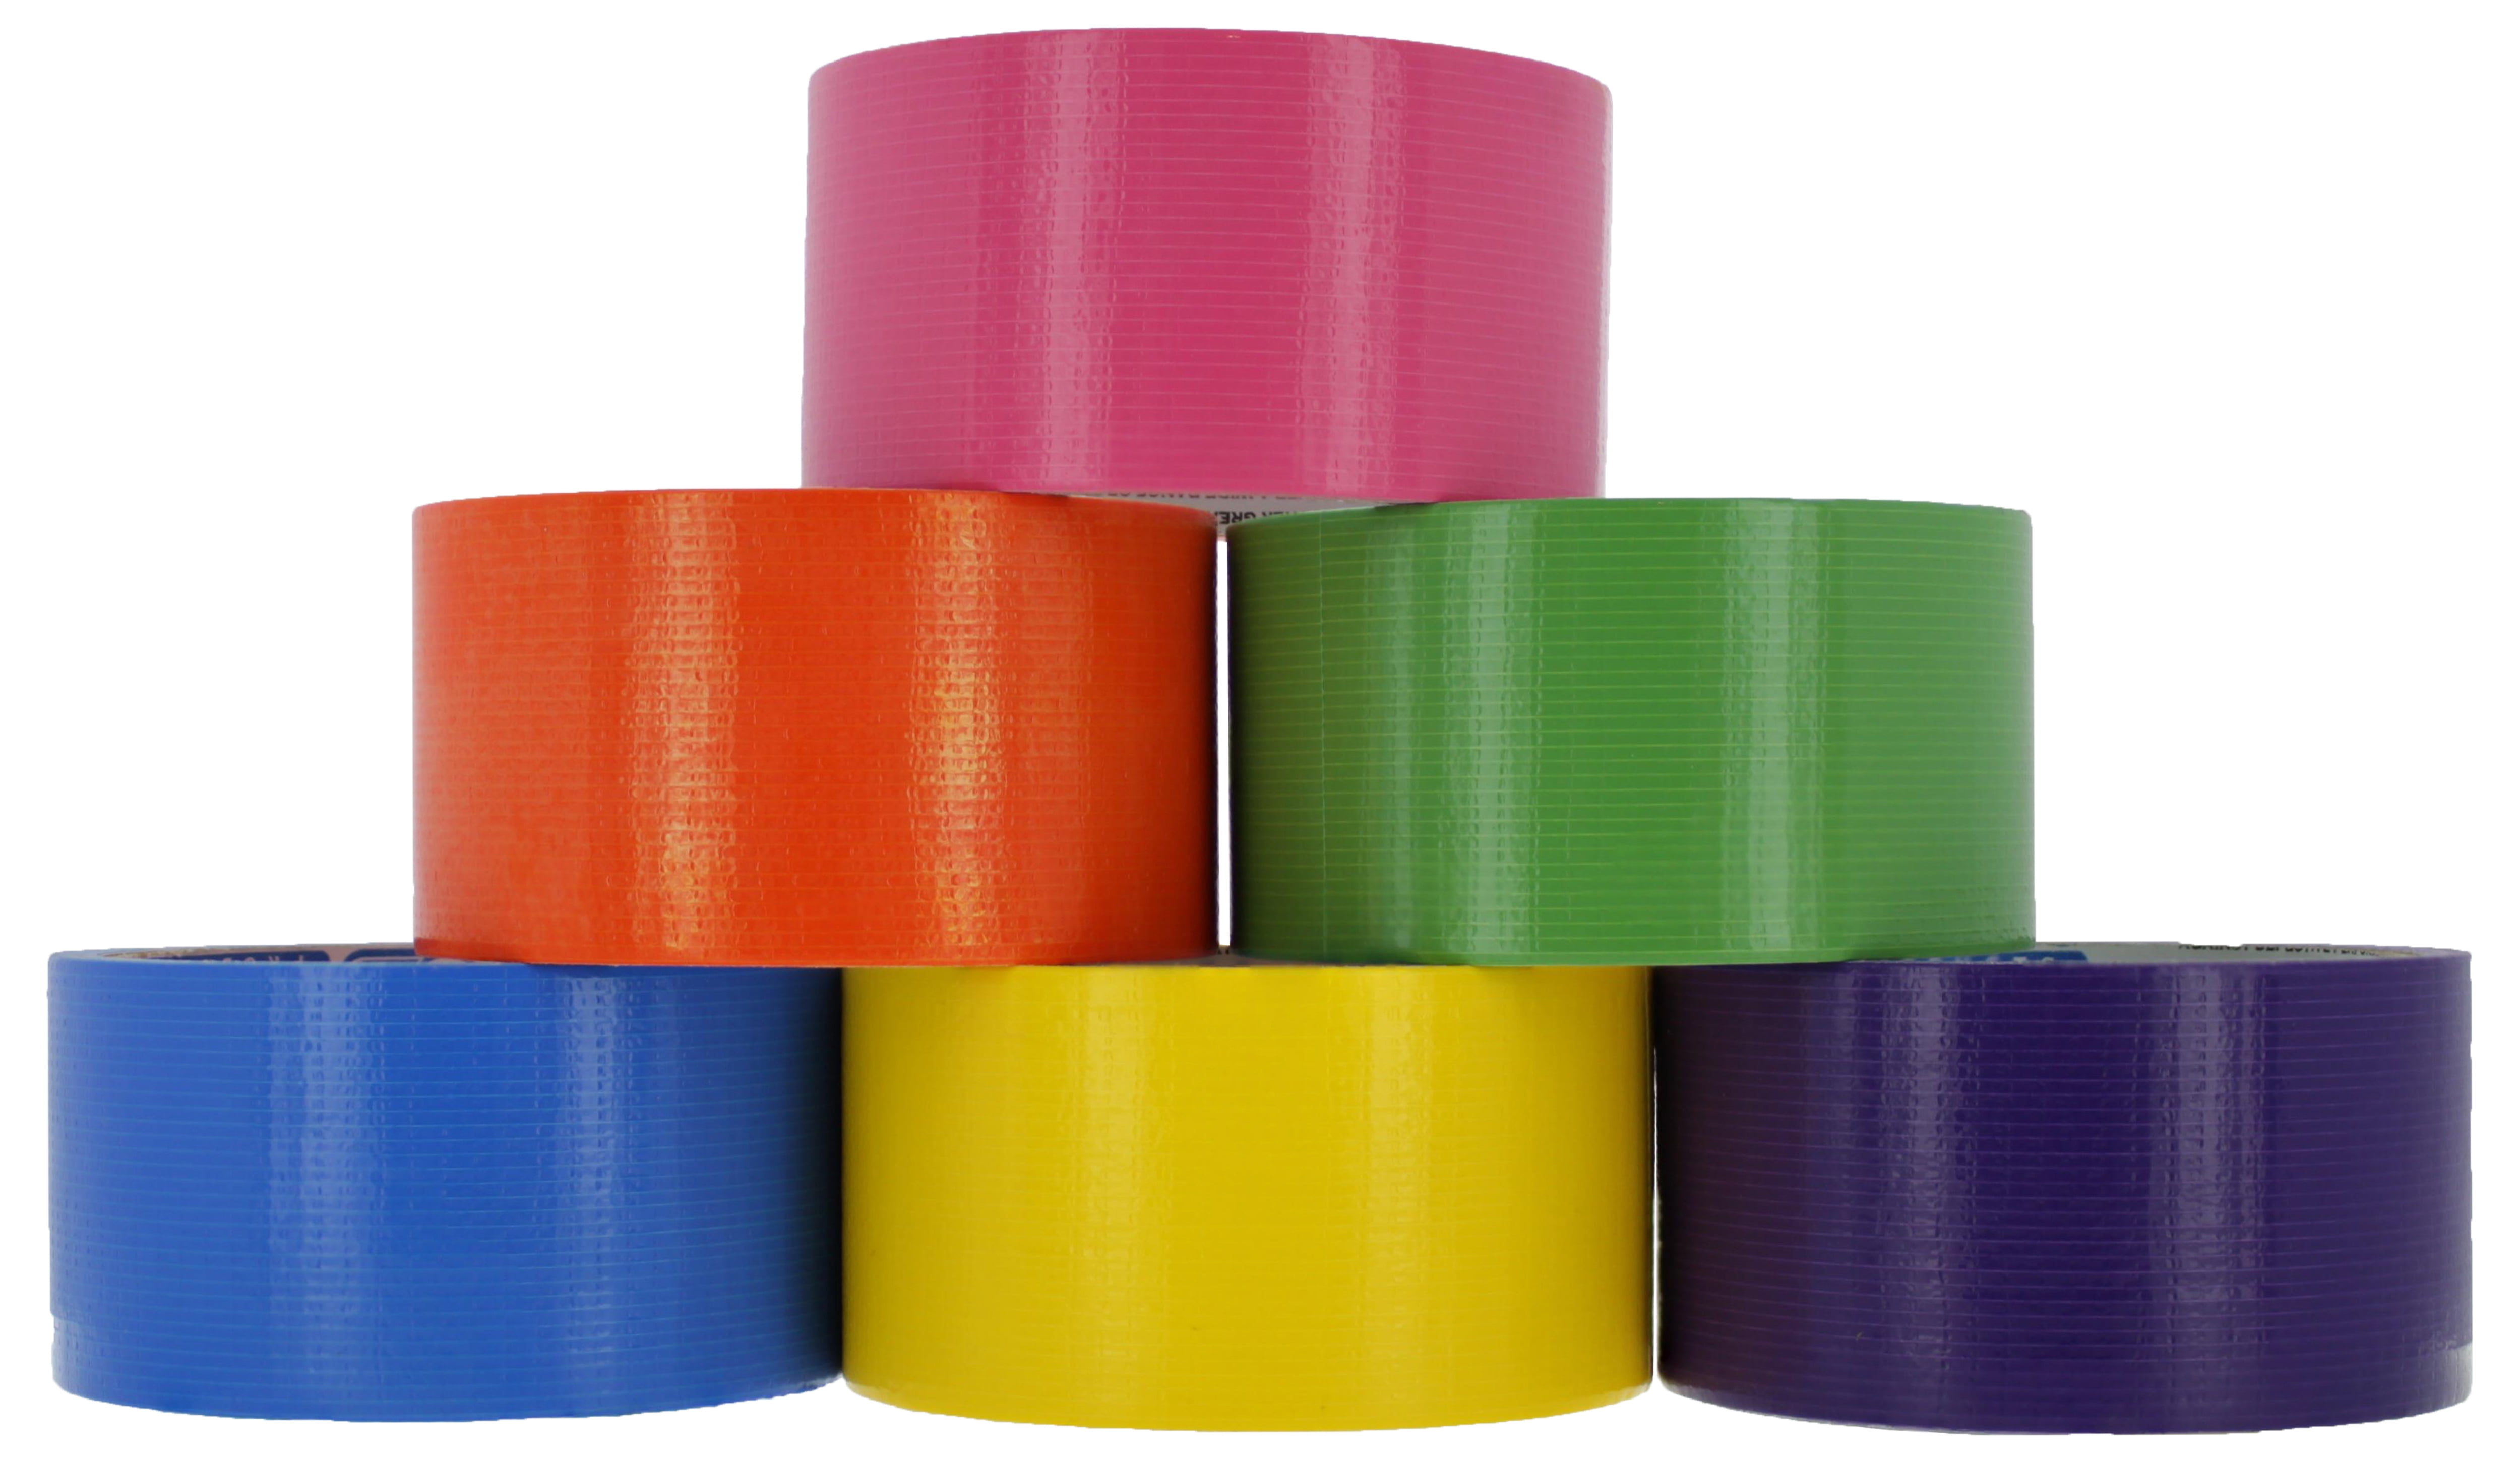 Ciieeo 1 Roll Color Duct Tape Colorful Duct Tape Colorful Decor Colored  Duct Tape Colorful Tape Colored Tape Color Tape Warning Sticker Warning  Tape